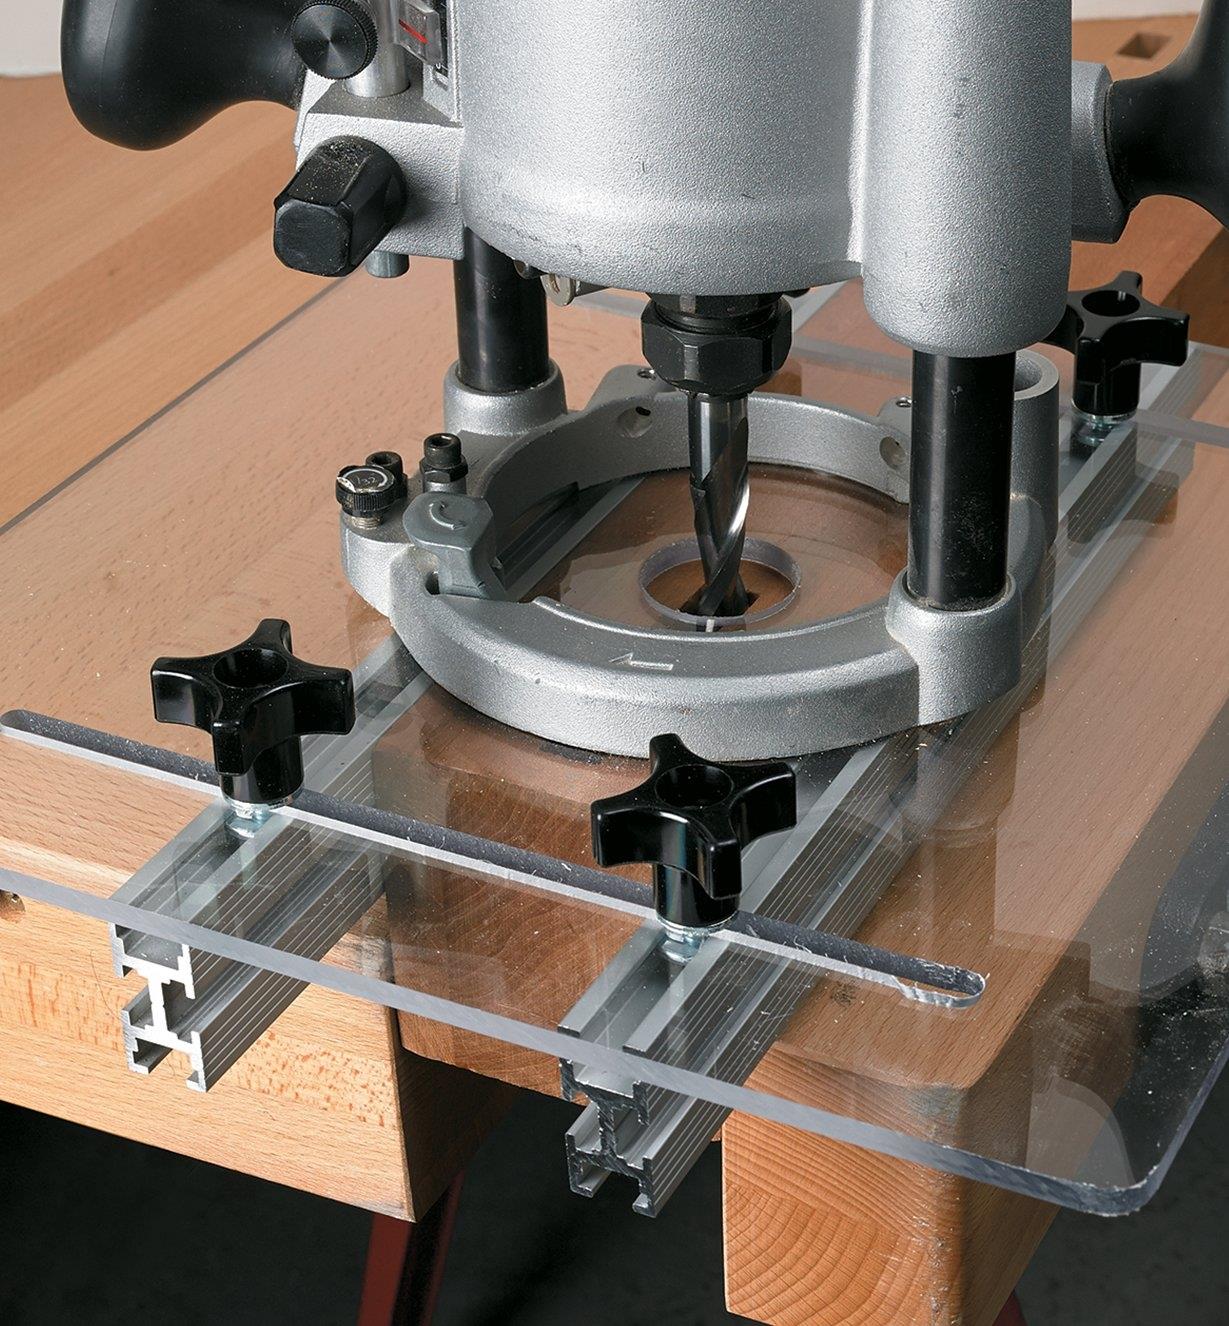 Router base plate/mortising jig made with a polycarbonate sheet